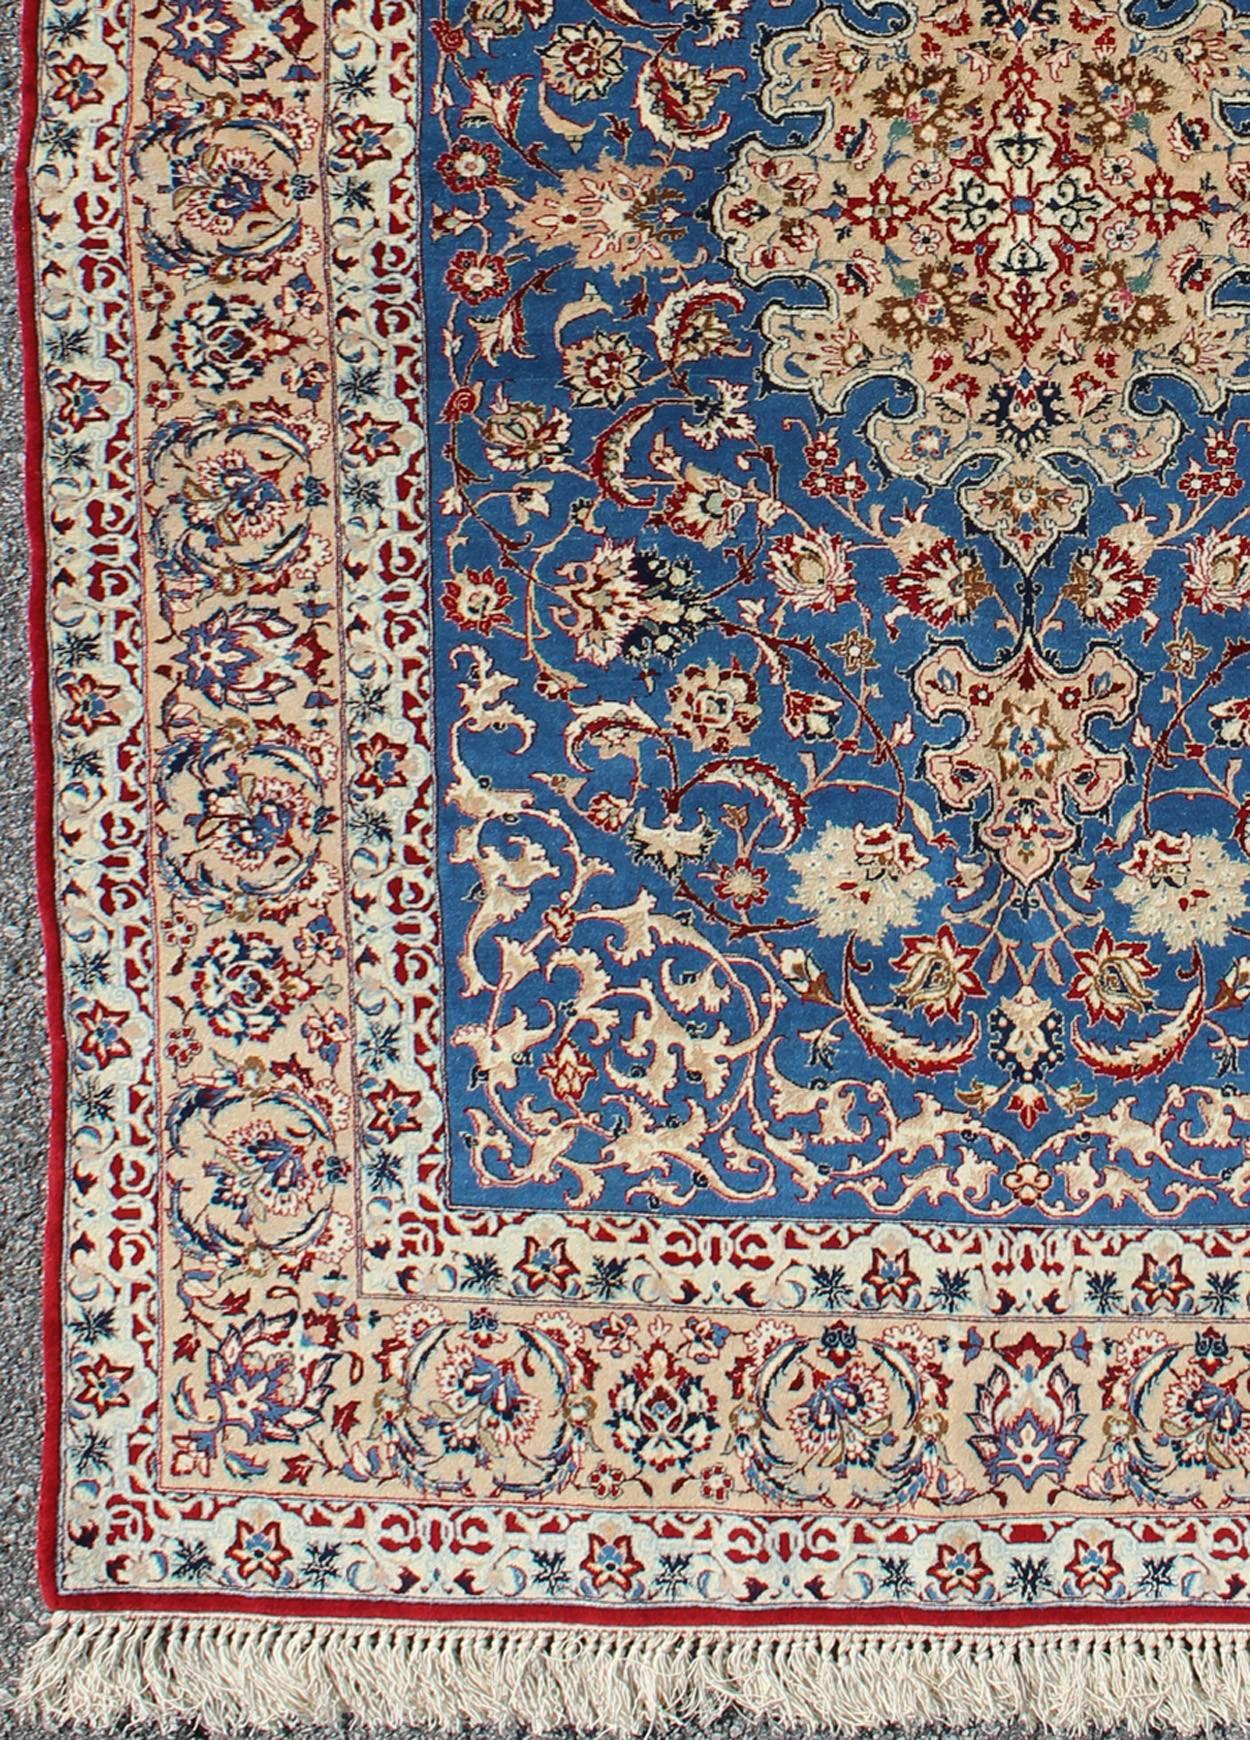 Blue Persian very fine Isfahan carpet with intricate and detailed floral elements, rug j10-0607, country of origin / type: Iran / Isfahan, circa 1950

Measures: 3'7 x 5'11.

This outstanding vintage Persian Isfahan carpet is primarily characterized